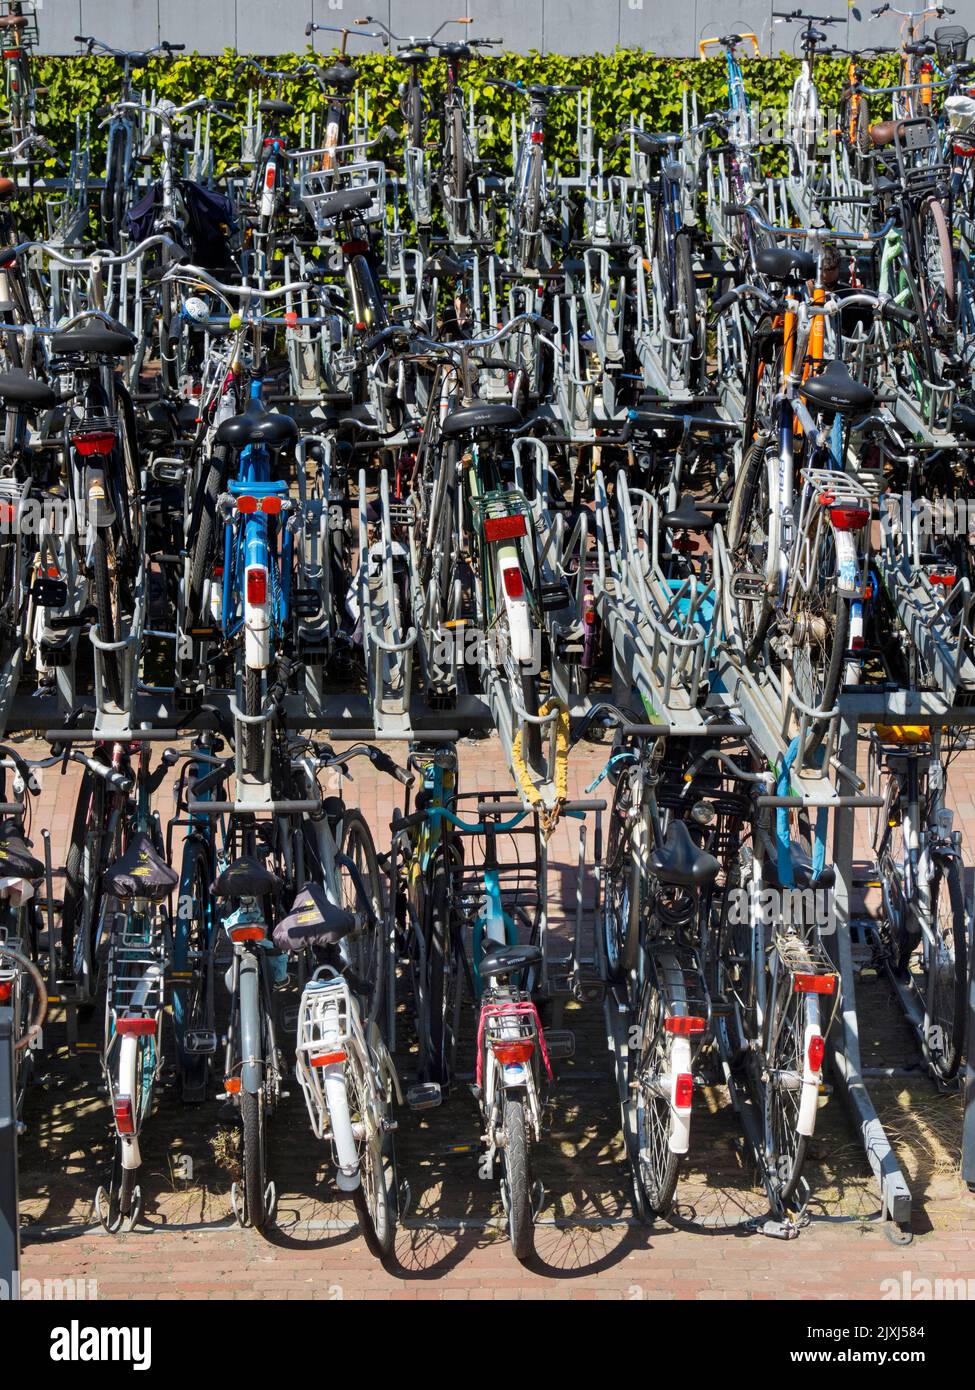 A bicycle culture prevails throughout the Netherlands. In Rotterdam, as in aall the country's urban areas, bikes and trams dominate. But I sometimes w Stock Photo